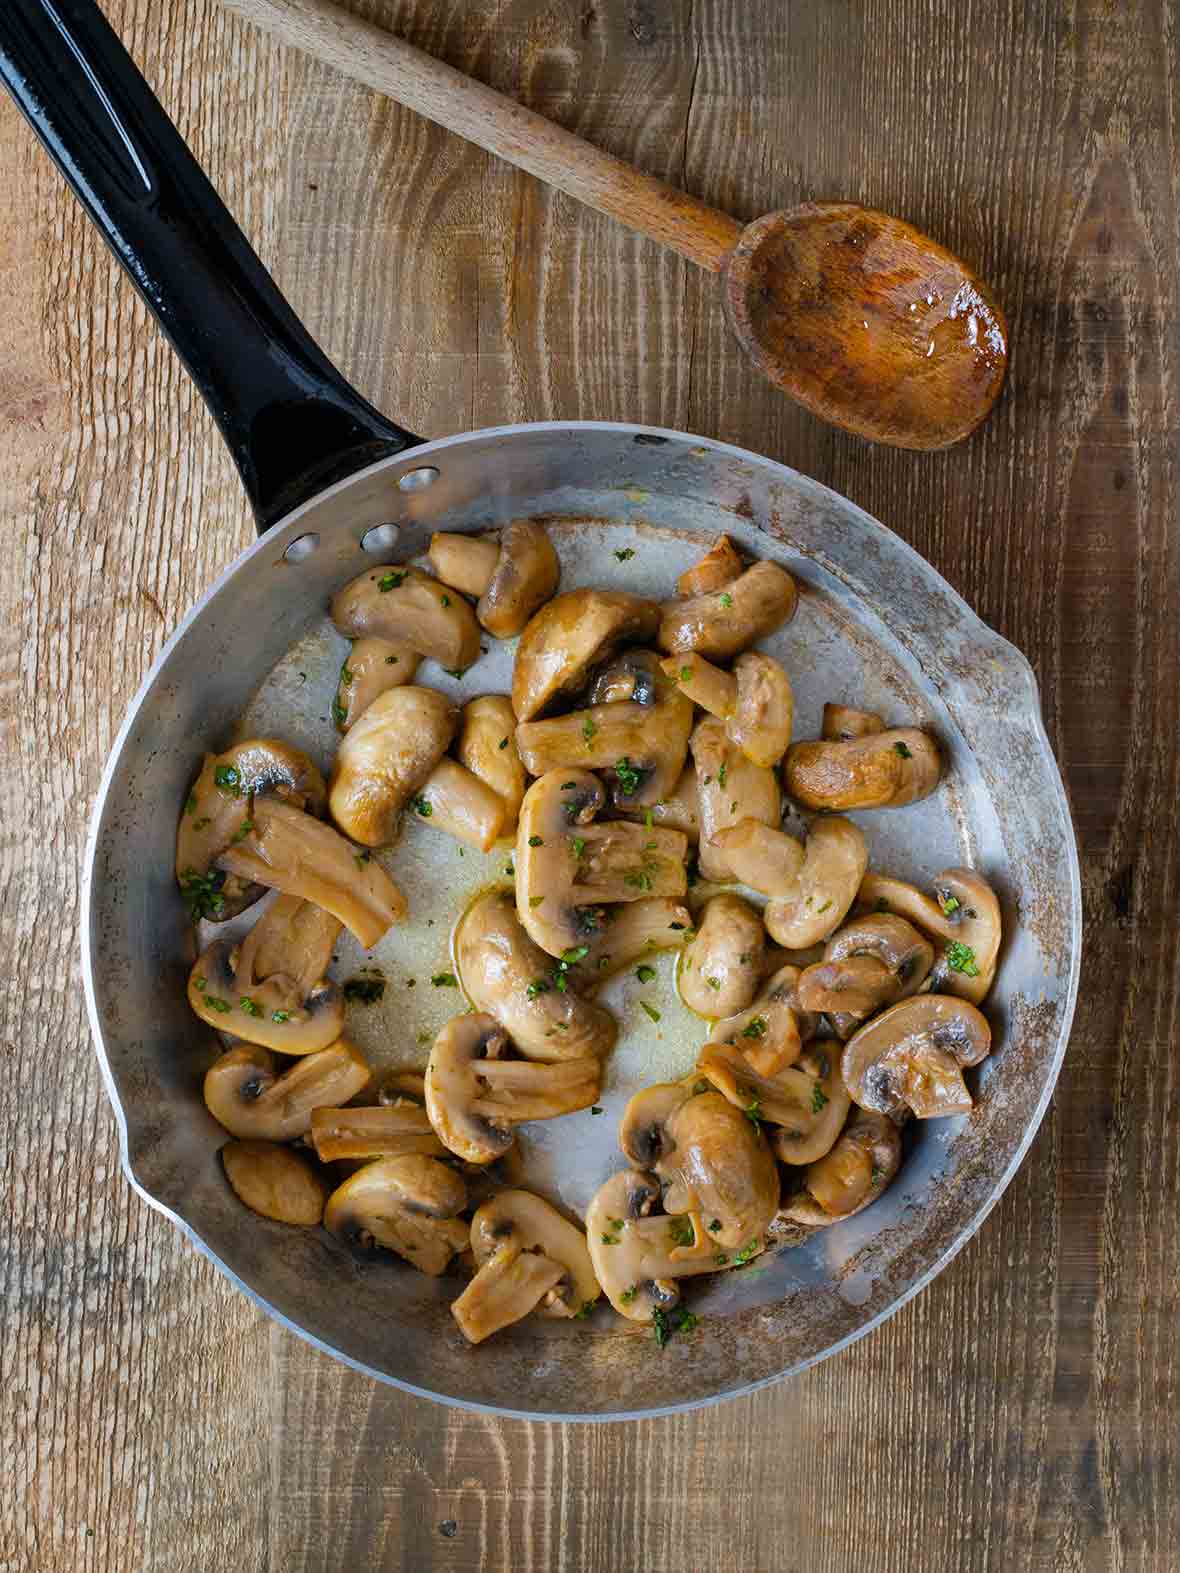 A skillet filled with mushrooms with garlic and sherry, sprinkled with parsley, and a wooden spoon resting beside it.